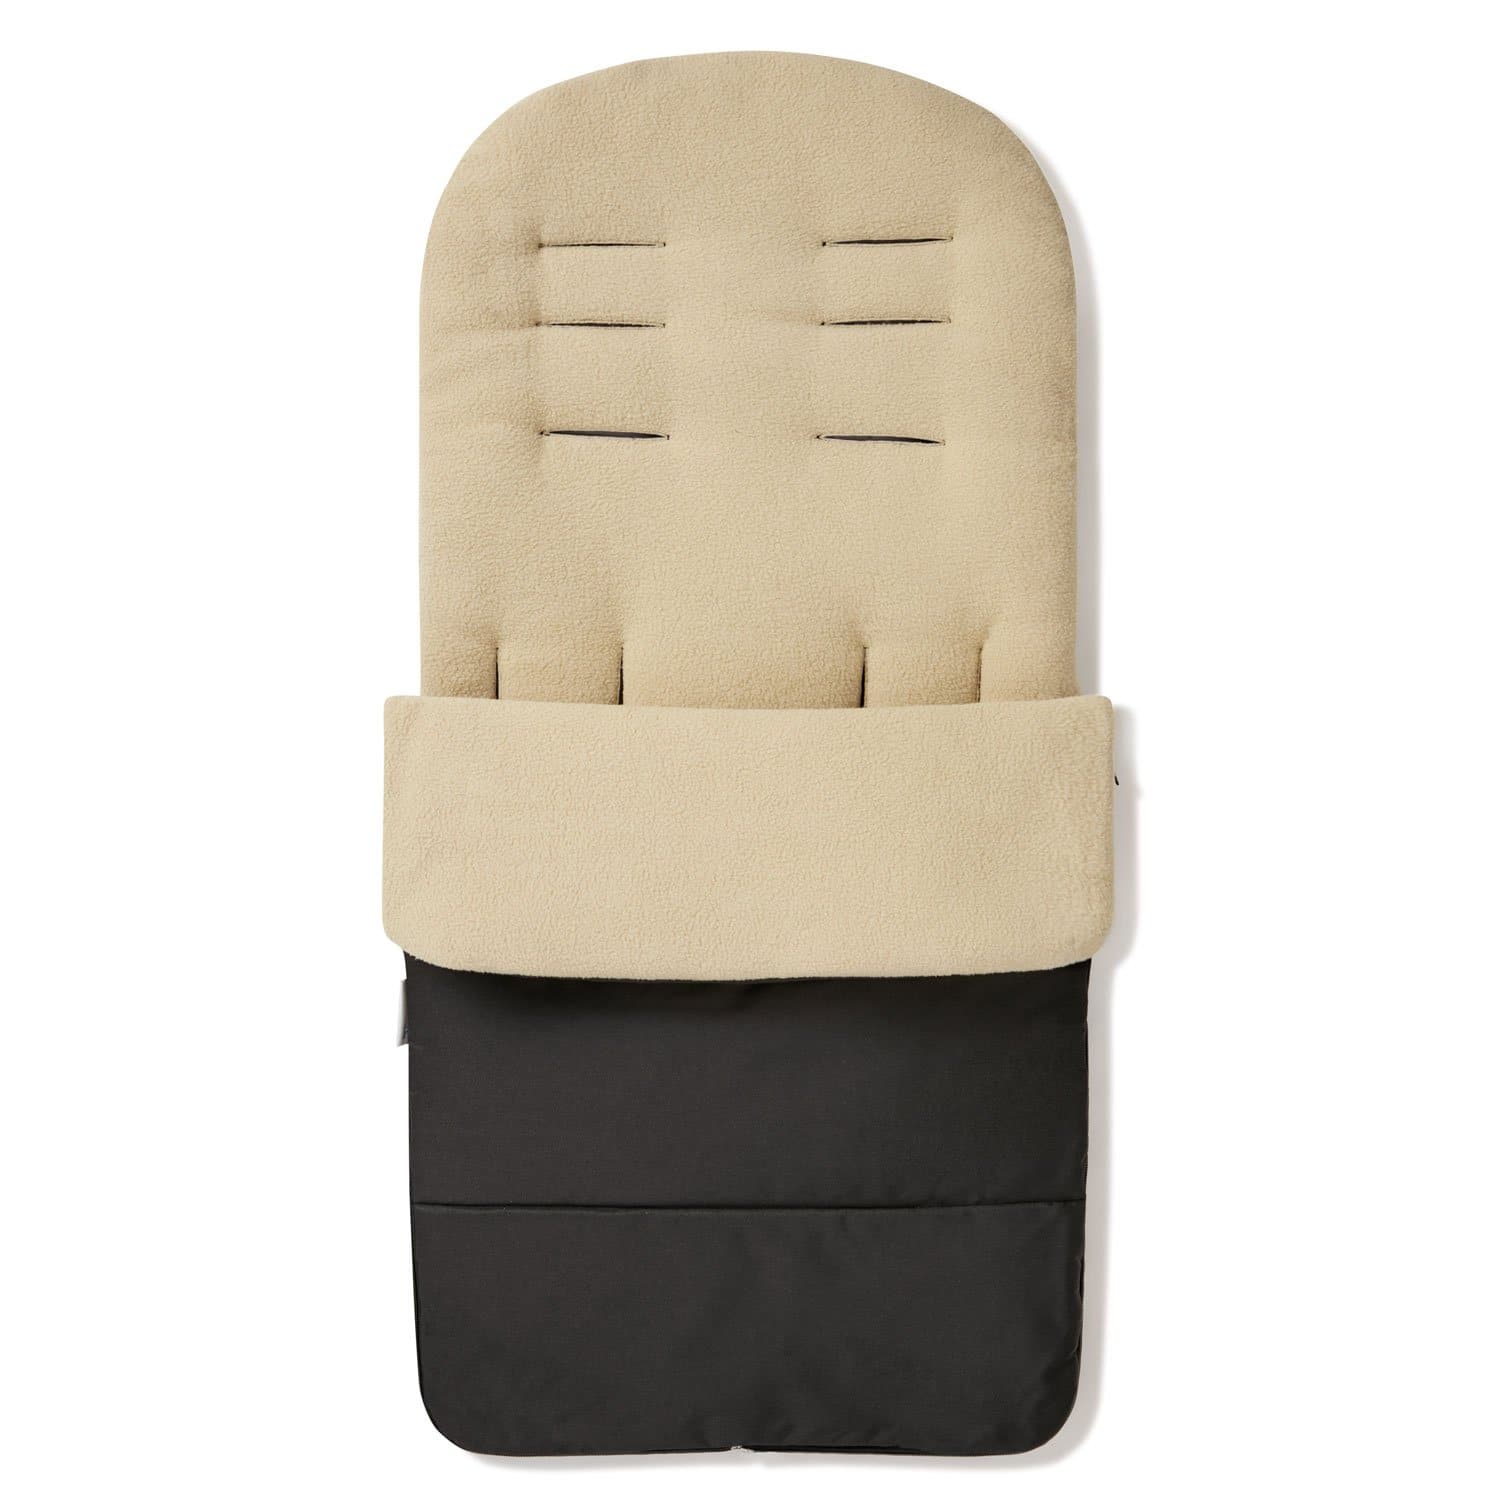 Premium Footmuff / Cosy Toes Compatible with Bloom - Desert Sand / Fits All Models | For Your Little One